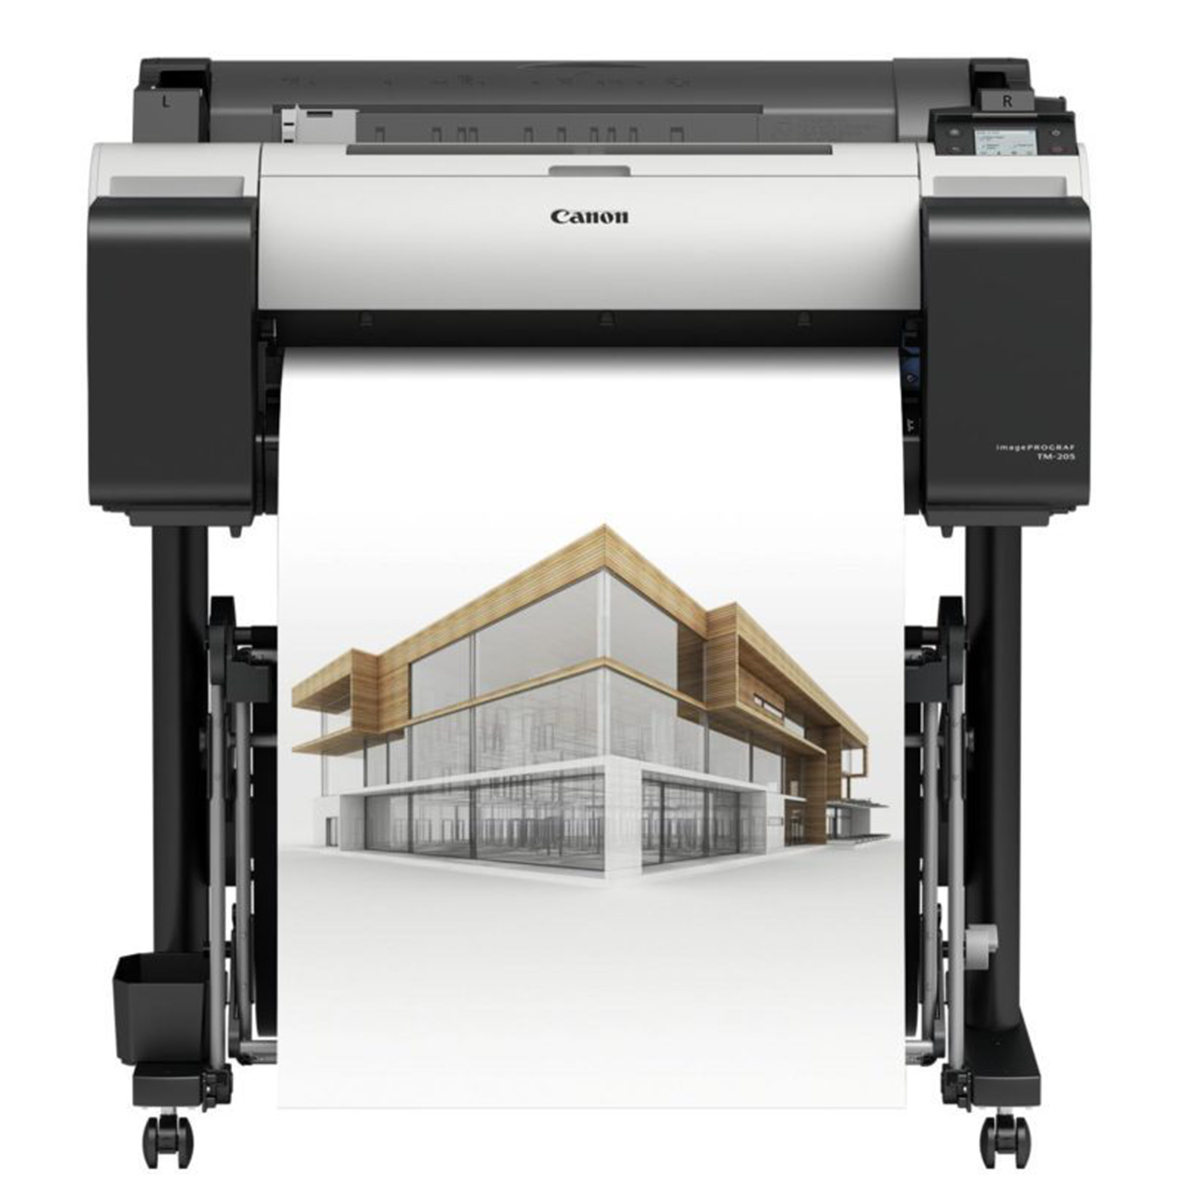 Canon TM 205 - A1 Wide Format Printer with Built in HDD